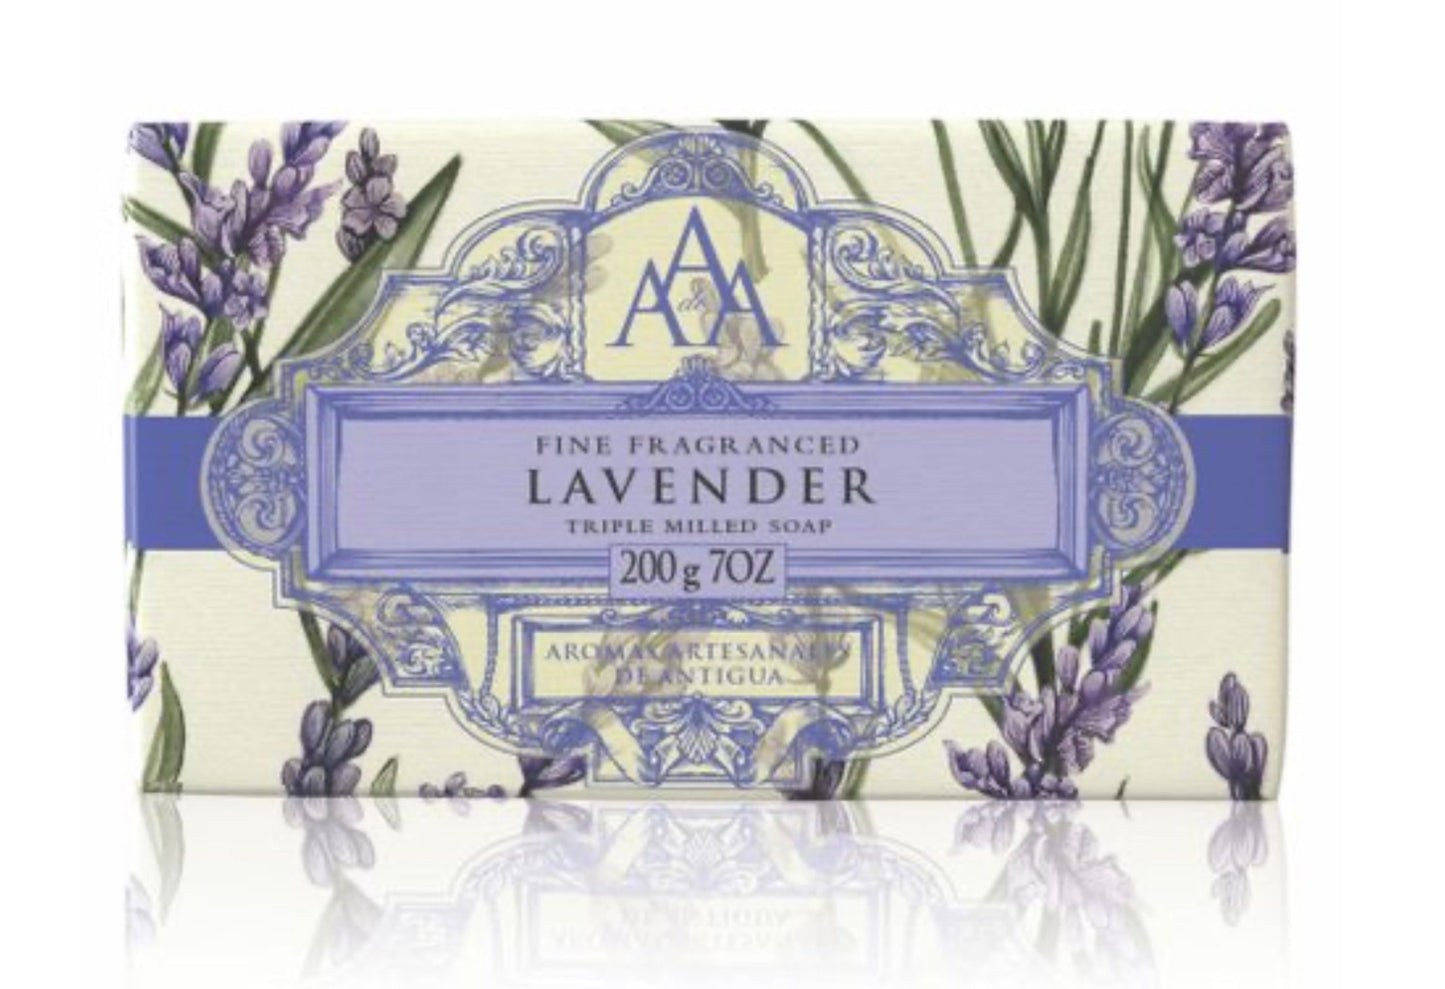 AAA Lavender Hand Soap